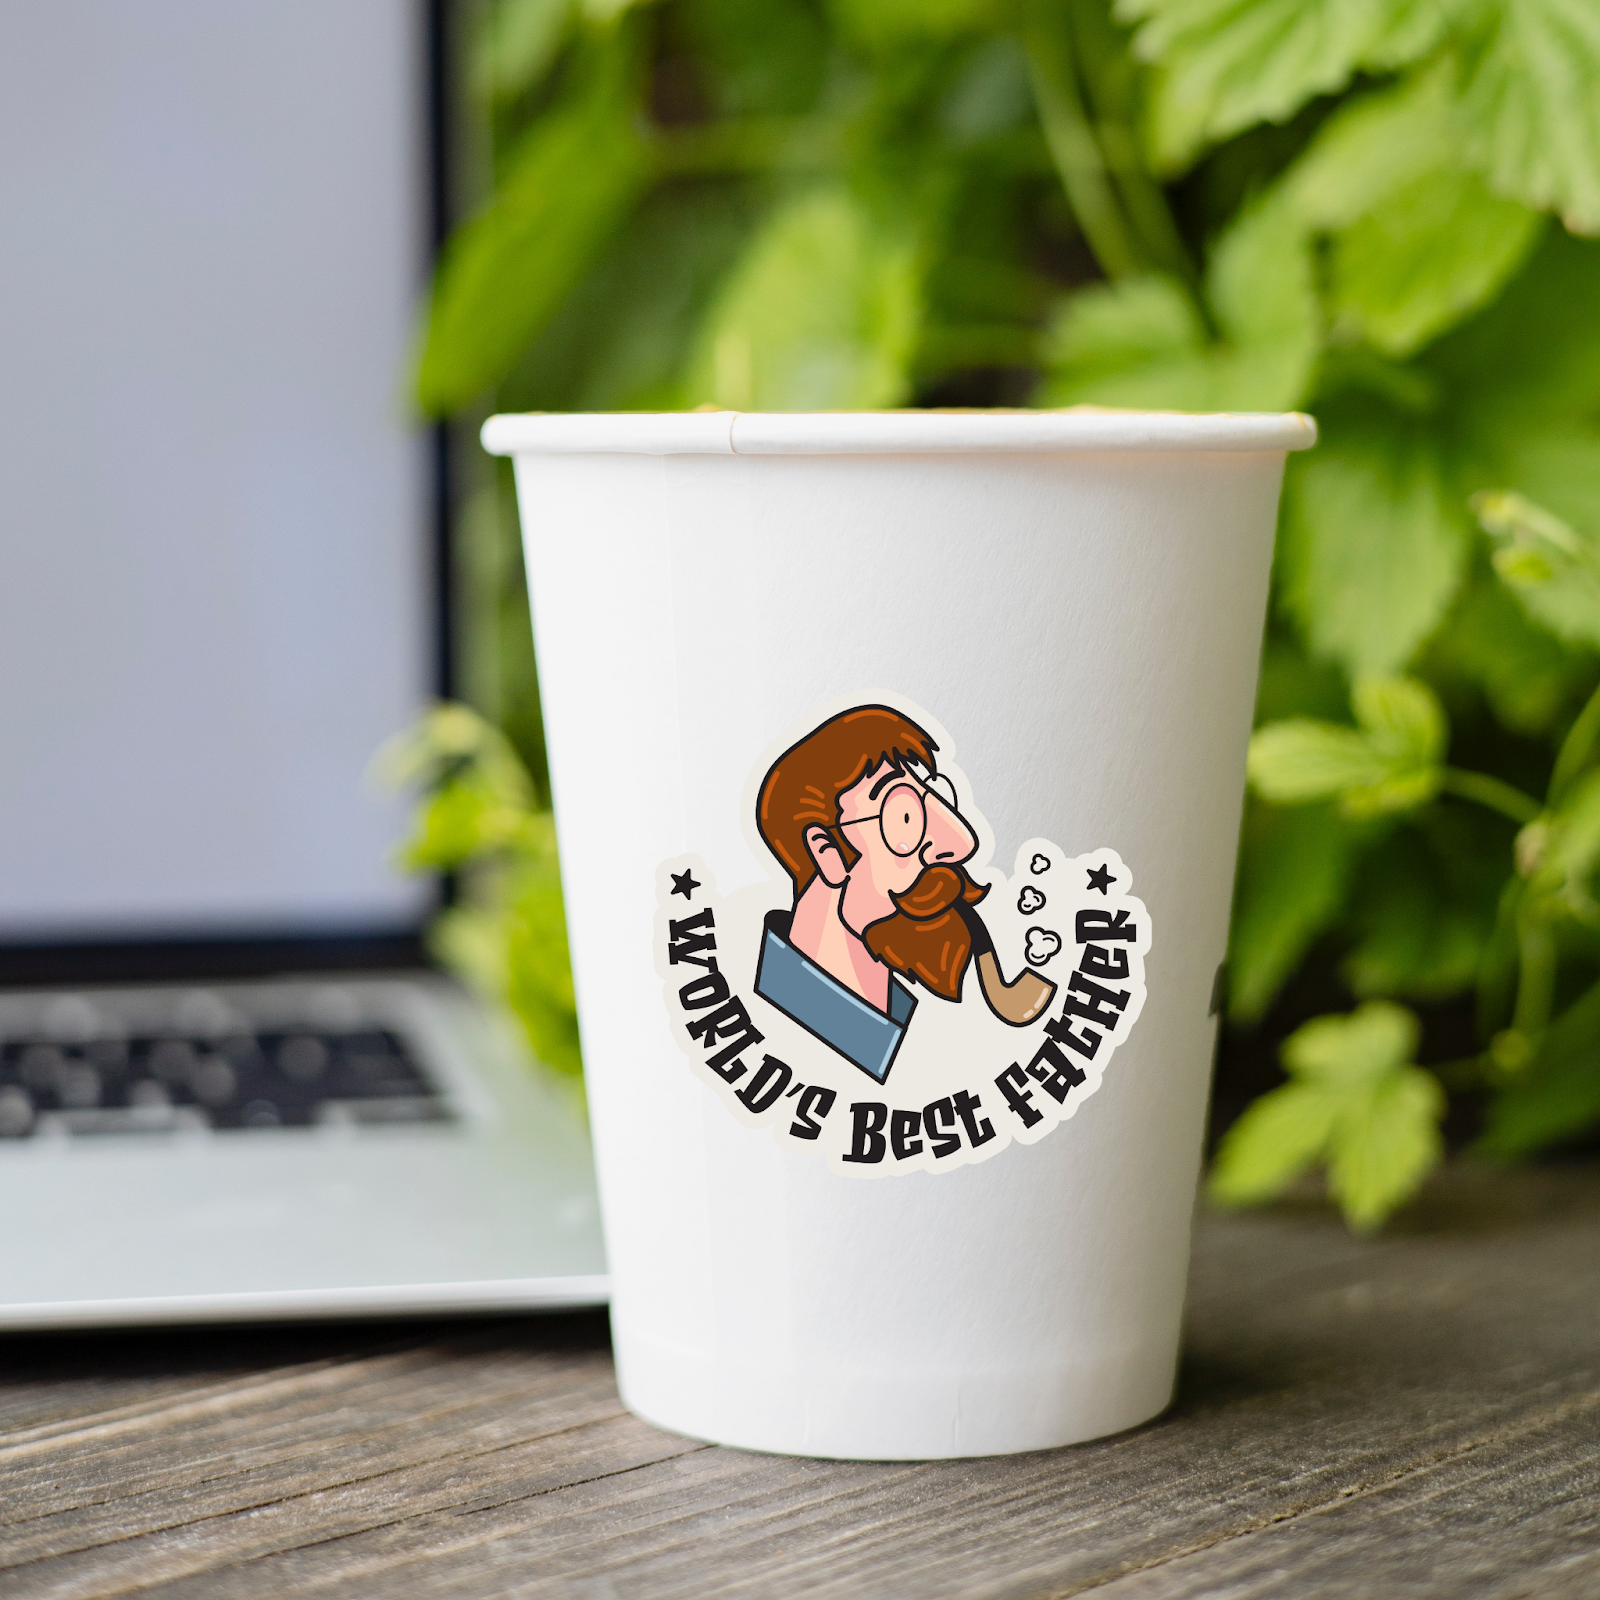 Personalized Mug designed with Father's Day Sticker